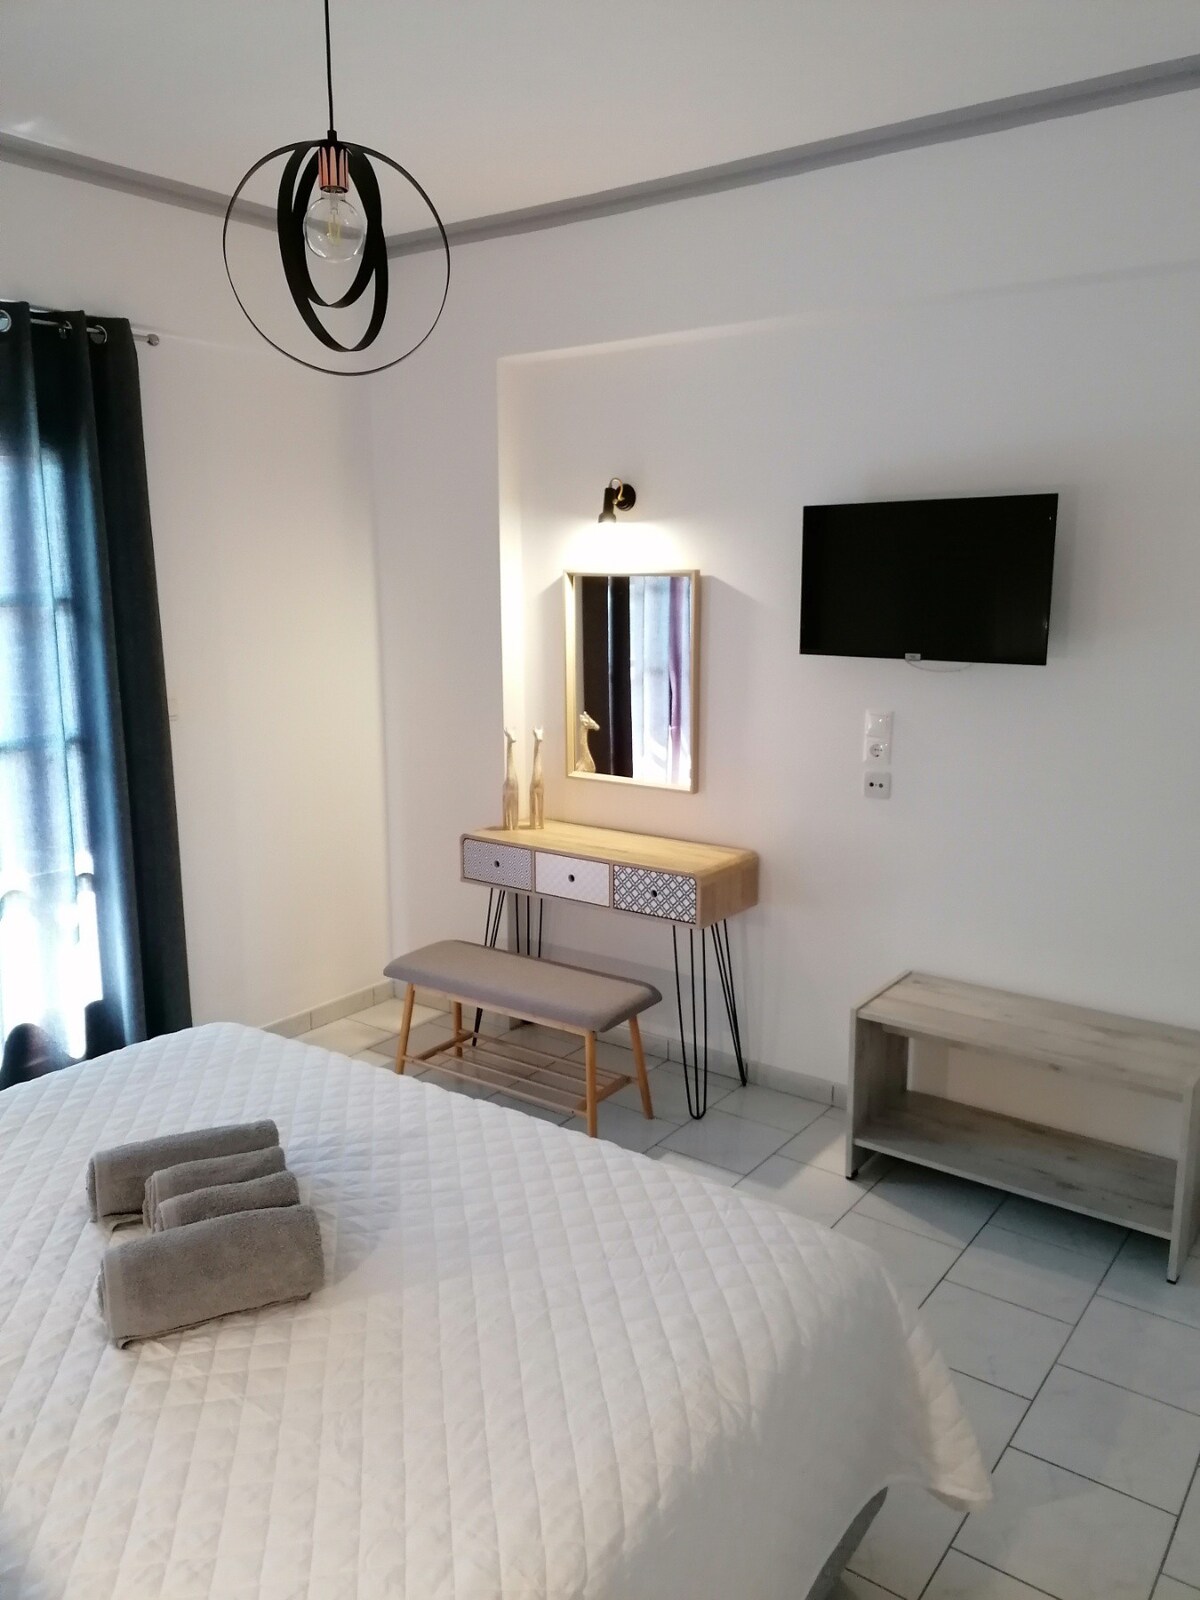 Iro's:Comfortable room next to the sea and nature